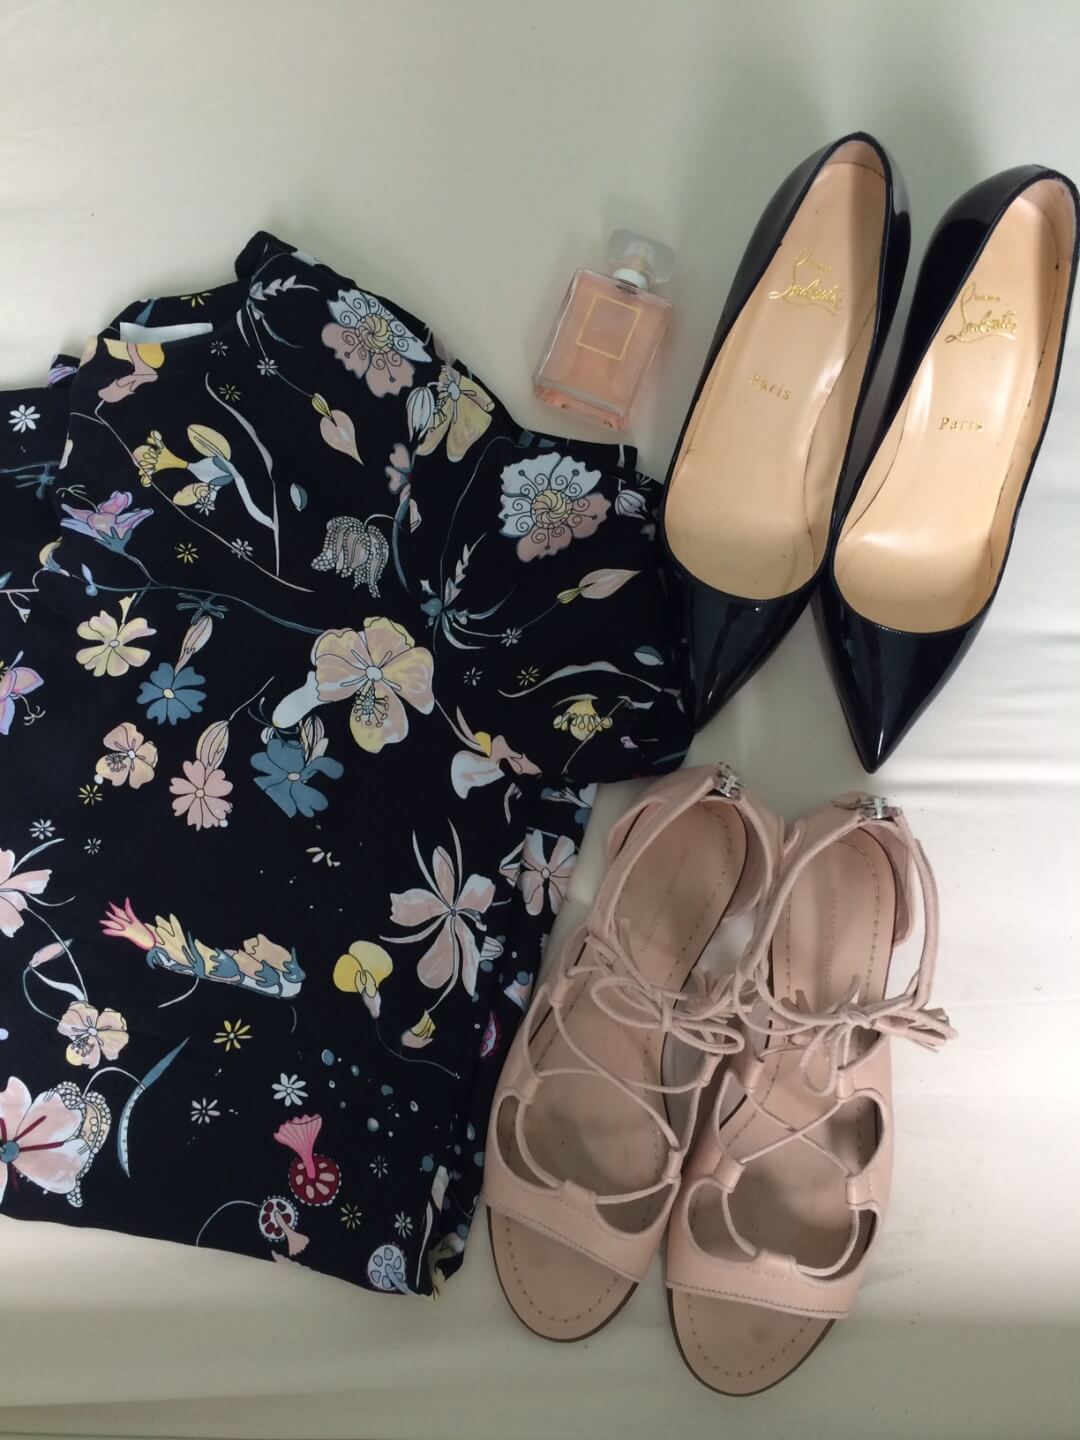 H&M Floral Printed Dress Outfit